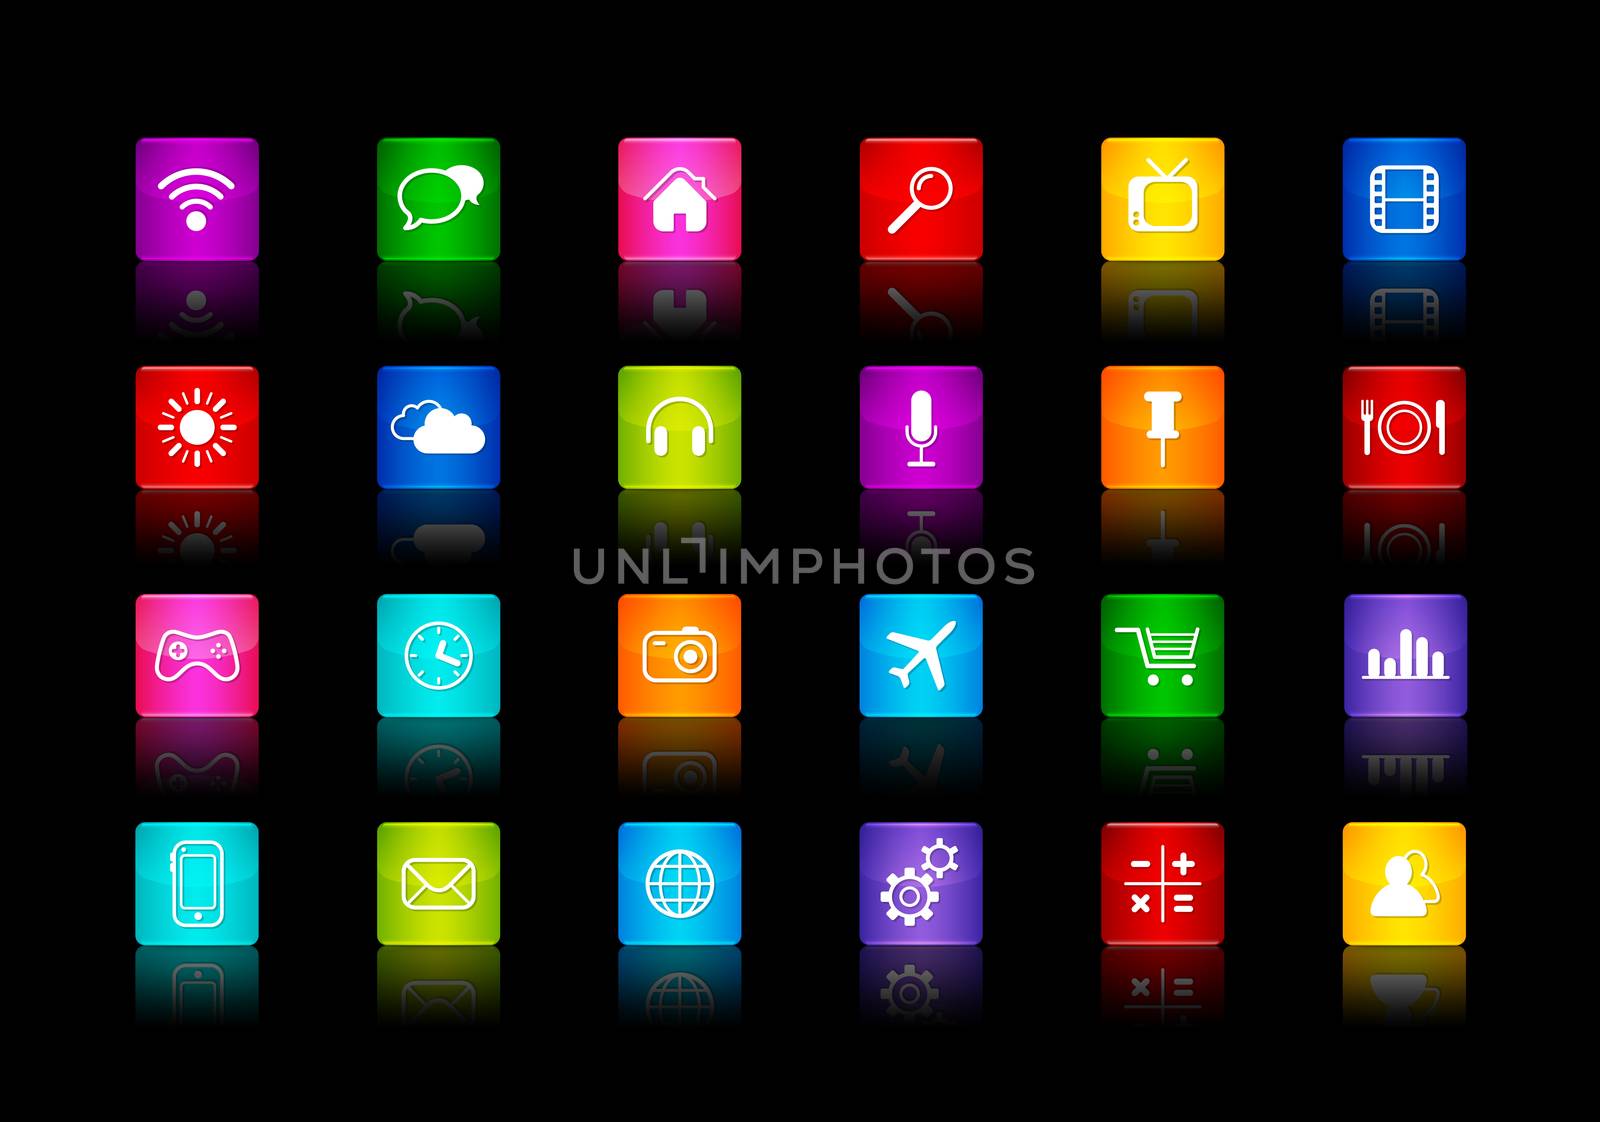 Desktop Icons collection. Isolated on a black background